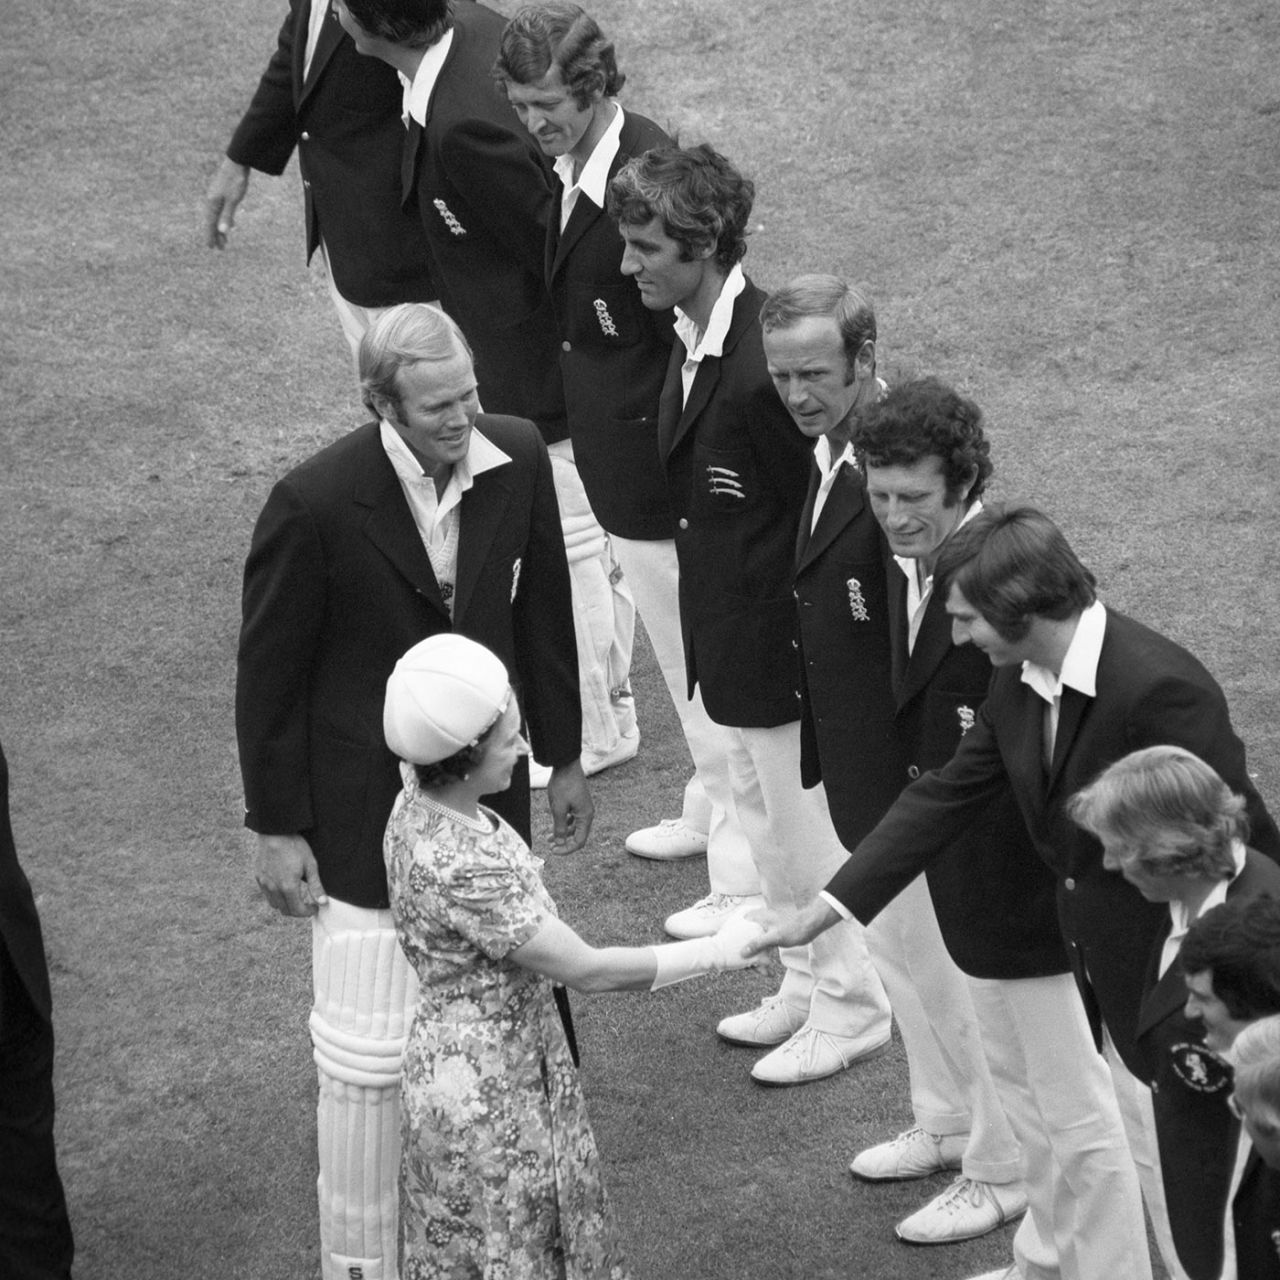 The England players are introduced to the Queen. From top left: Bob Woolmer, Pat Pocock, Mike Brearley, Derek Underwood, John Snow, Chris Old, Barry Wood, Alan Knott and David Steele. England v West Indies, second Test, day four, Lord's, June 21, 1976